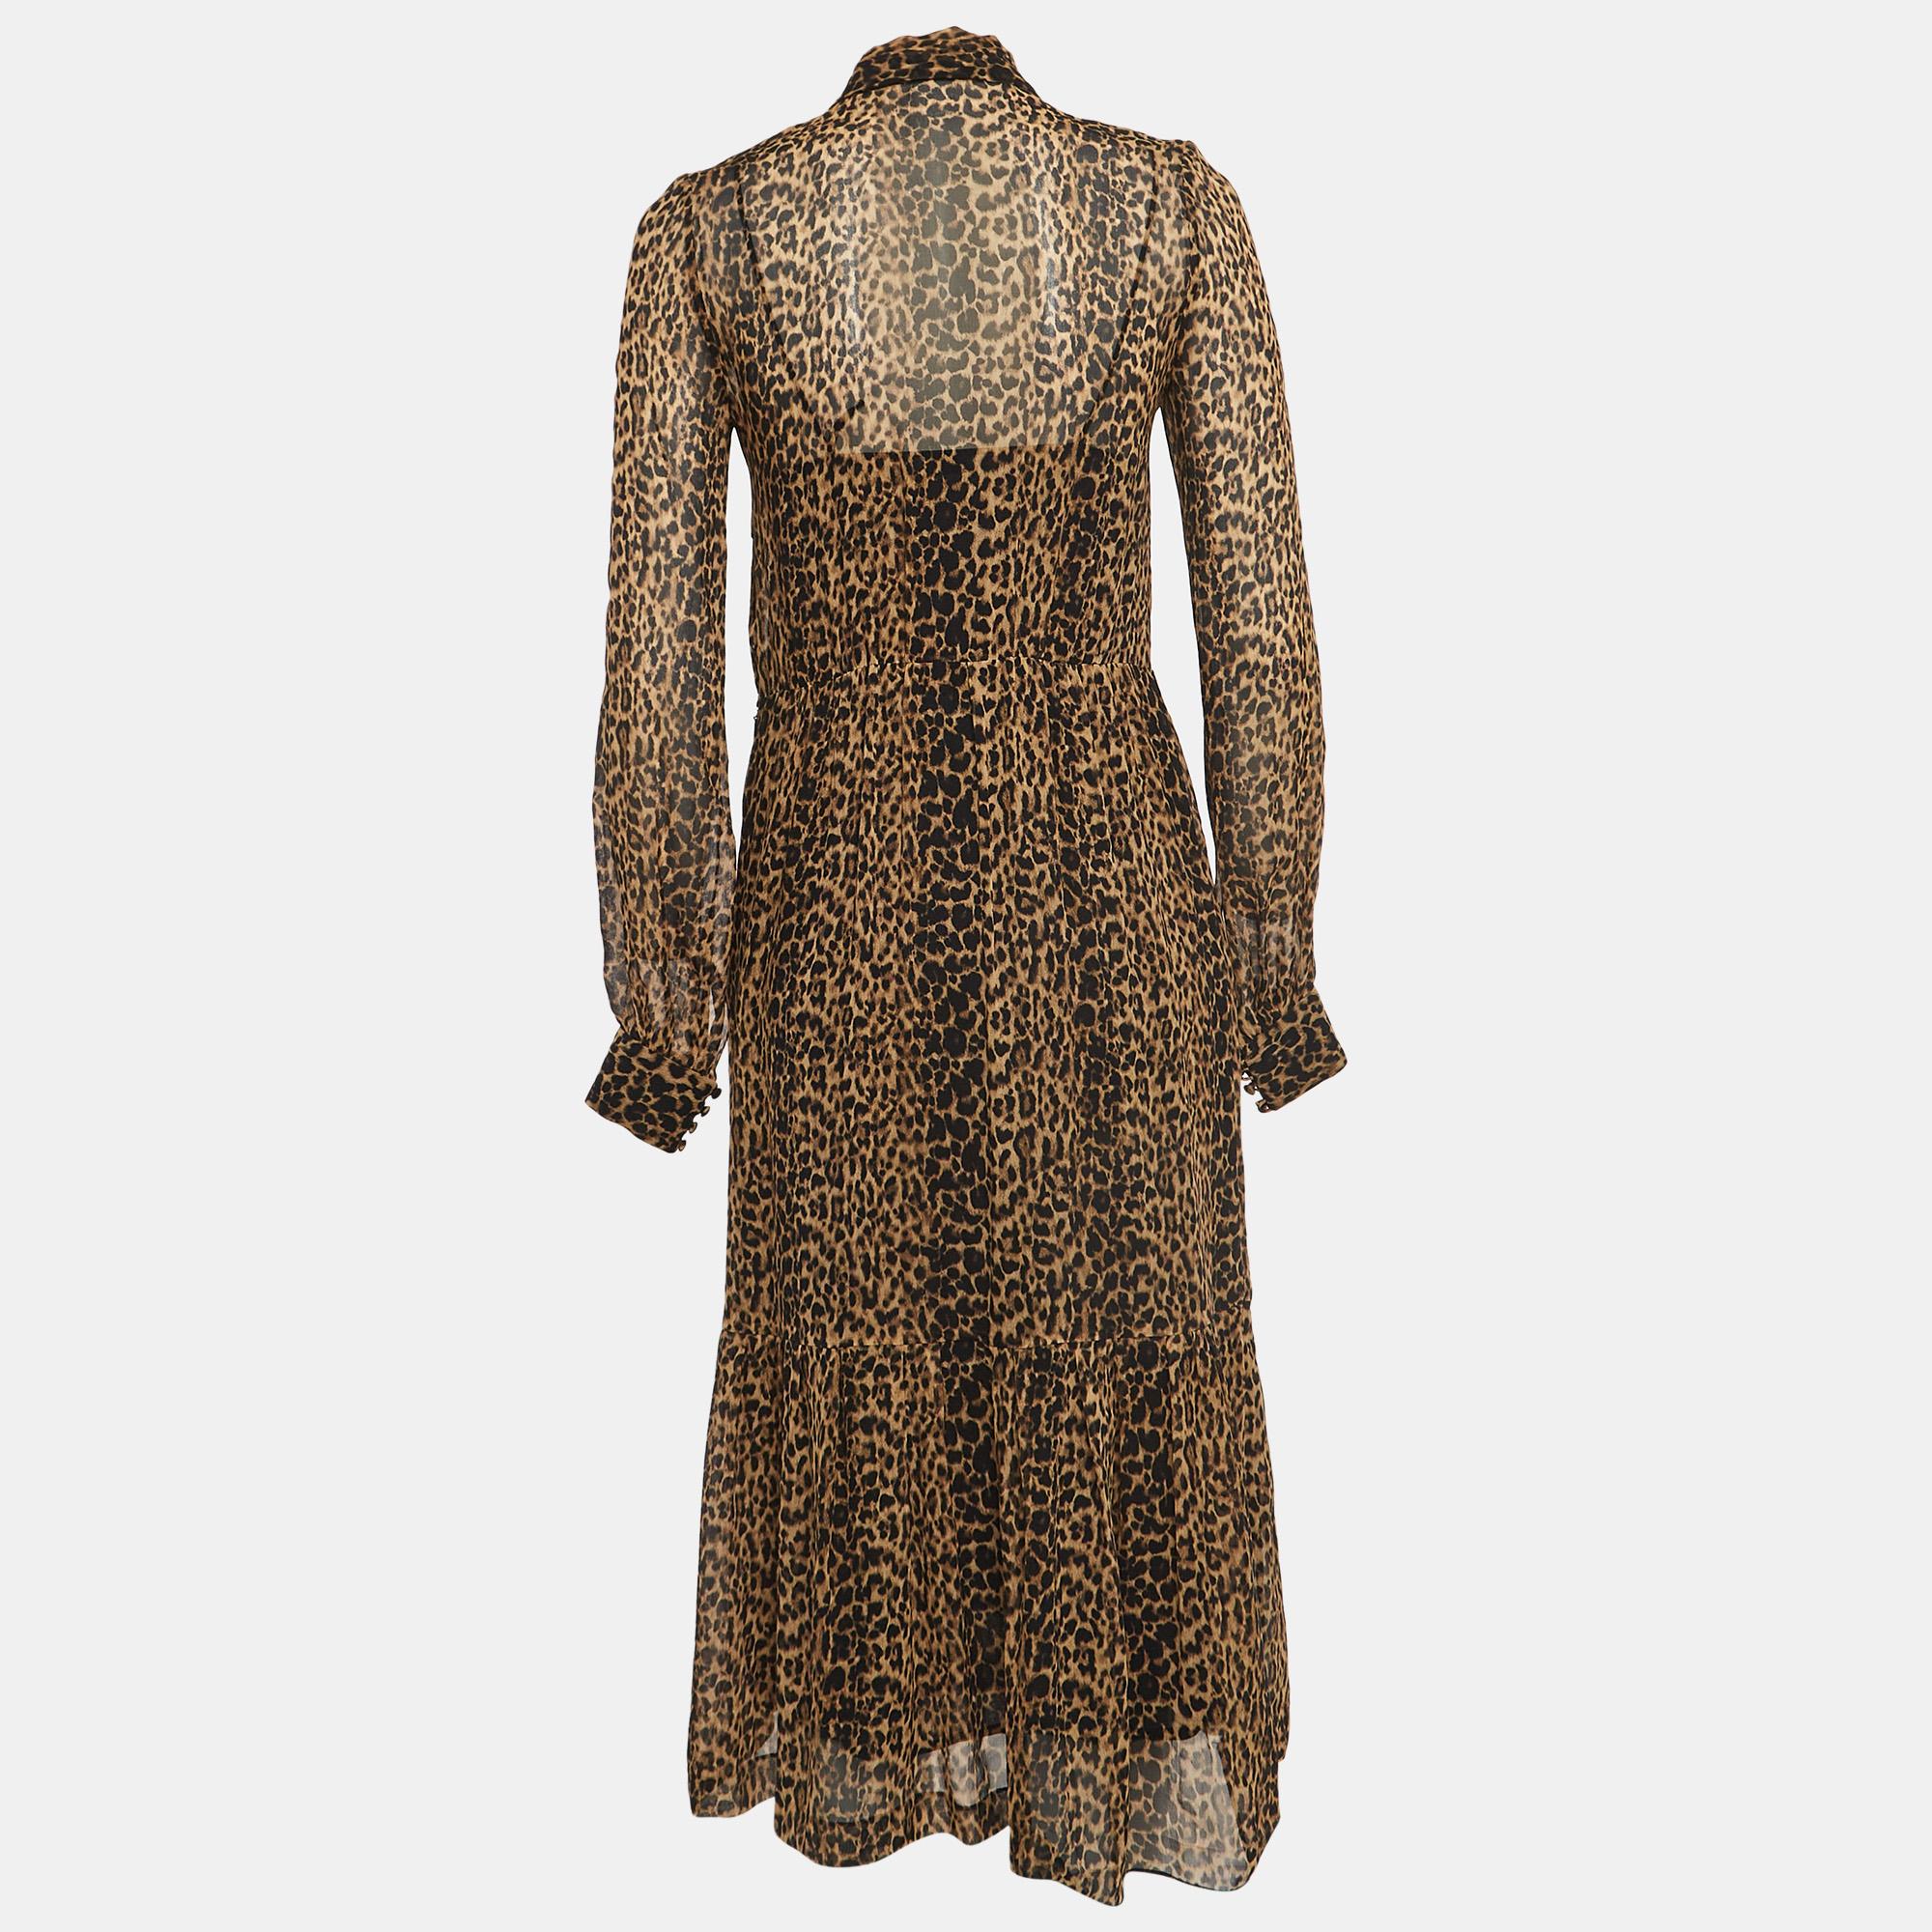 This Saint Laurent midi dress exudes elegance and sophistication. Its flattering length falls between the knee and ankle, offering a versatile option for various occasions. With its chic design, it combines modern trends with timeless charm, making